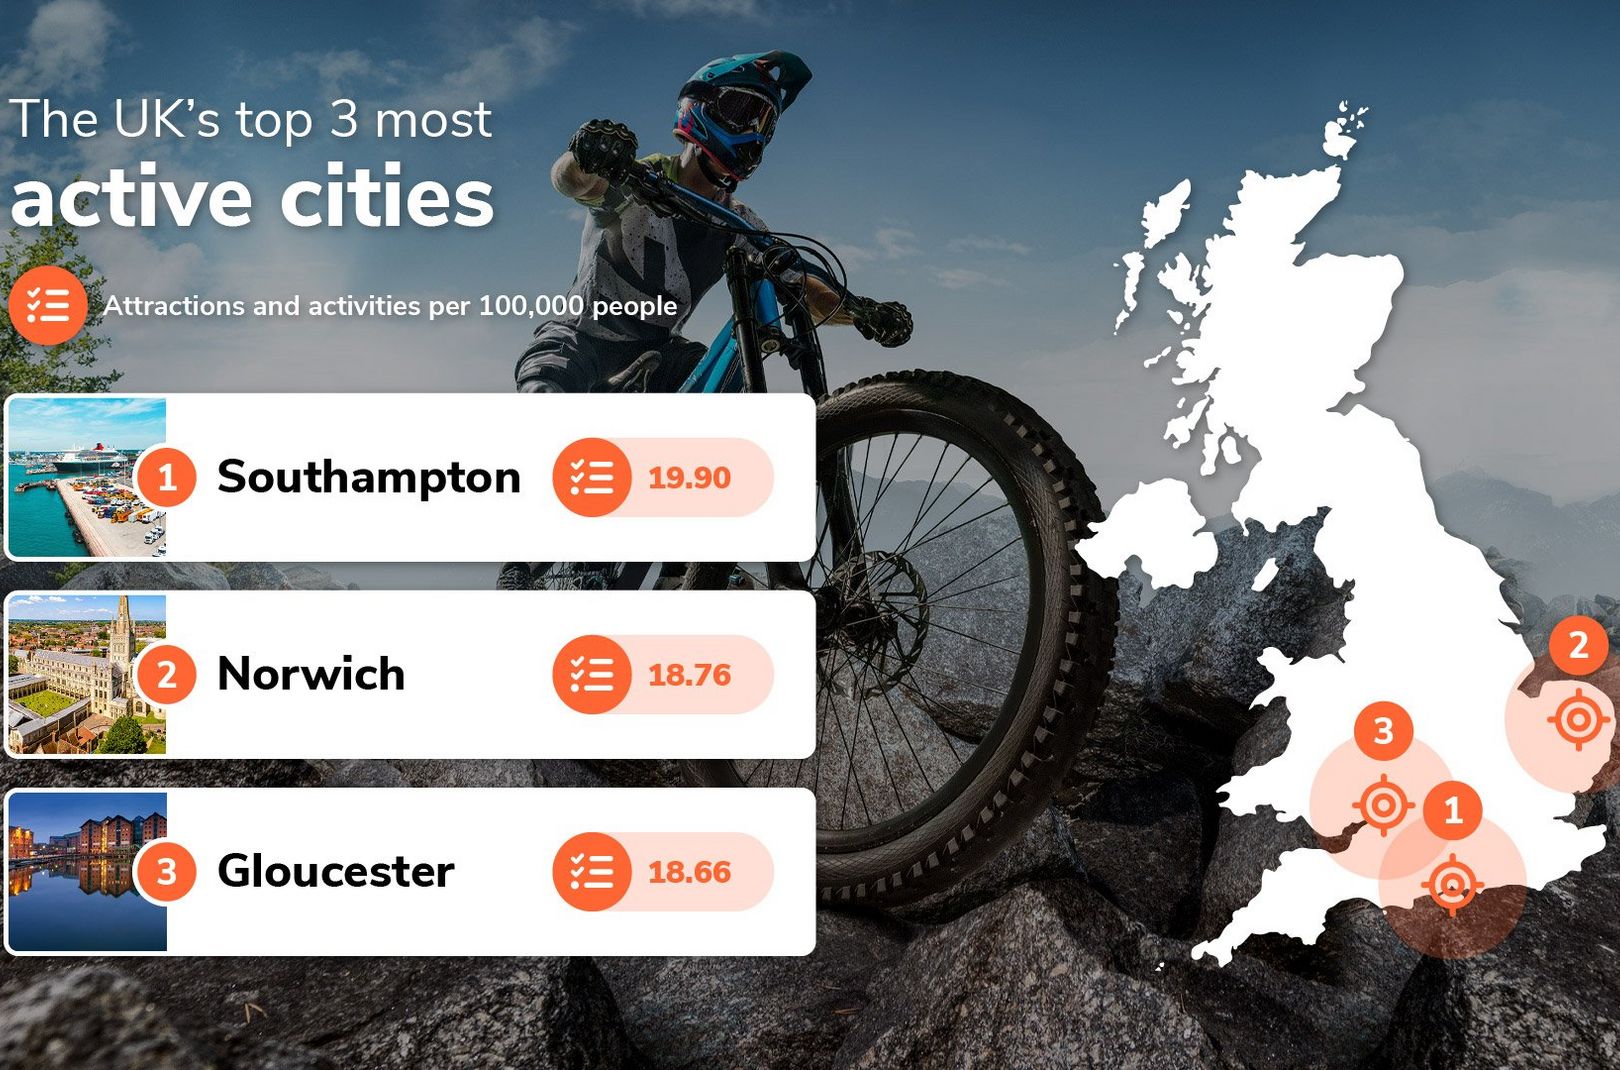 The UK’s most active cities